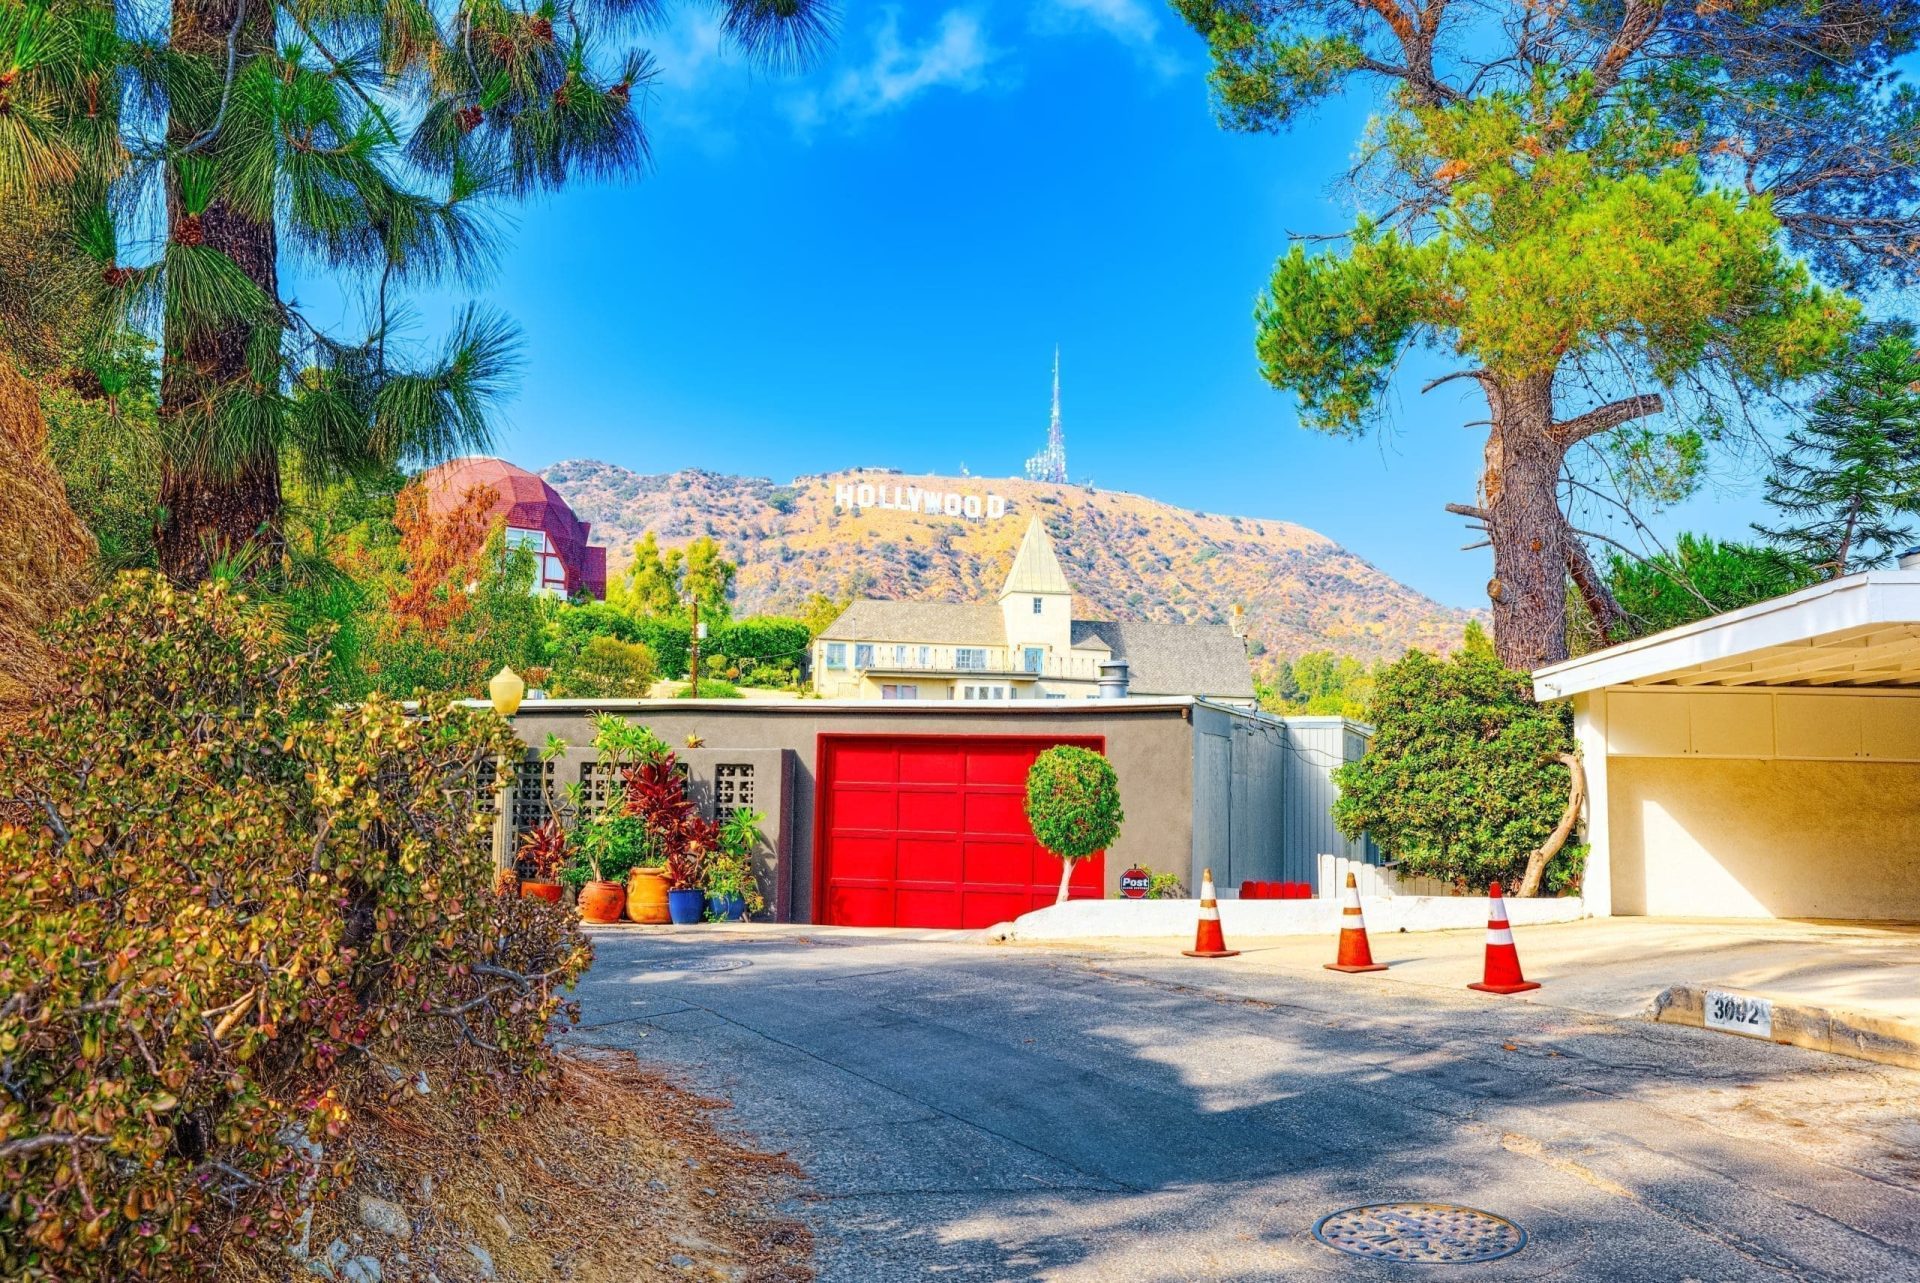 Where do the celebrities live in Beverly Hills?